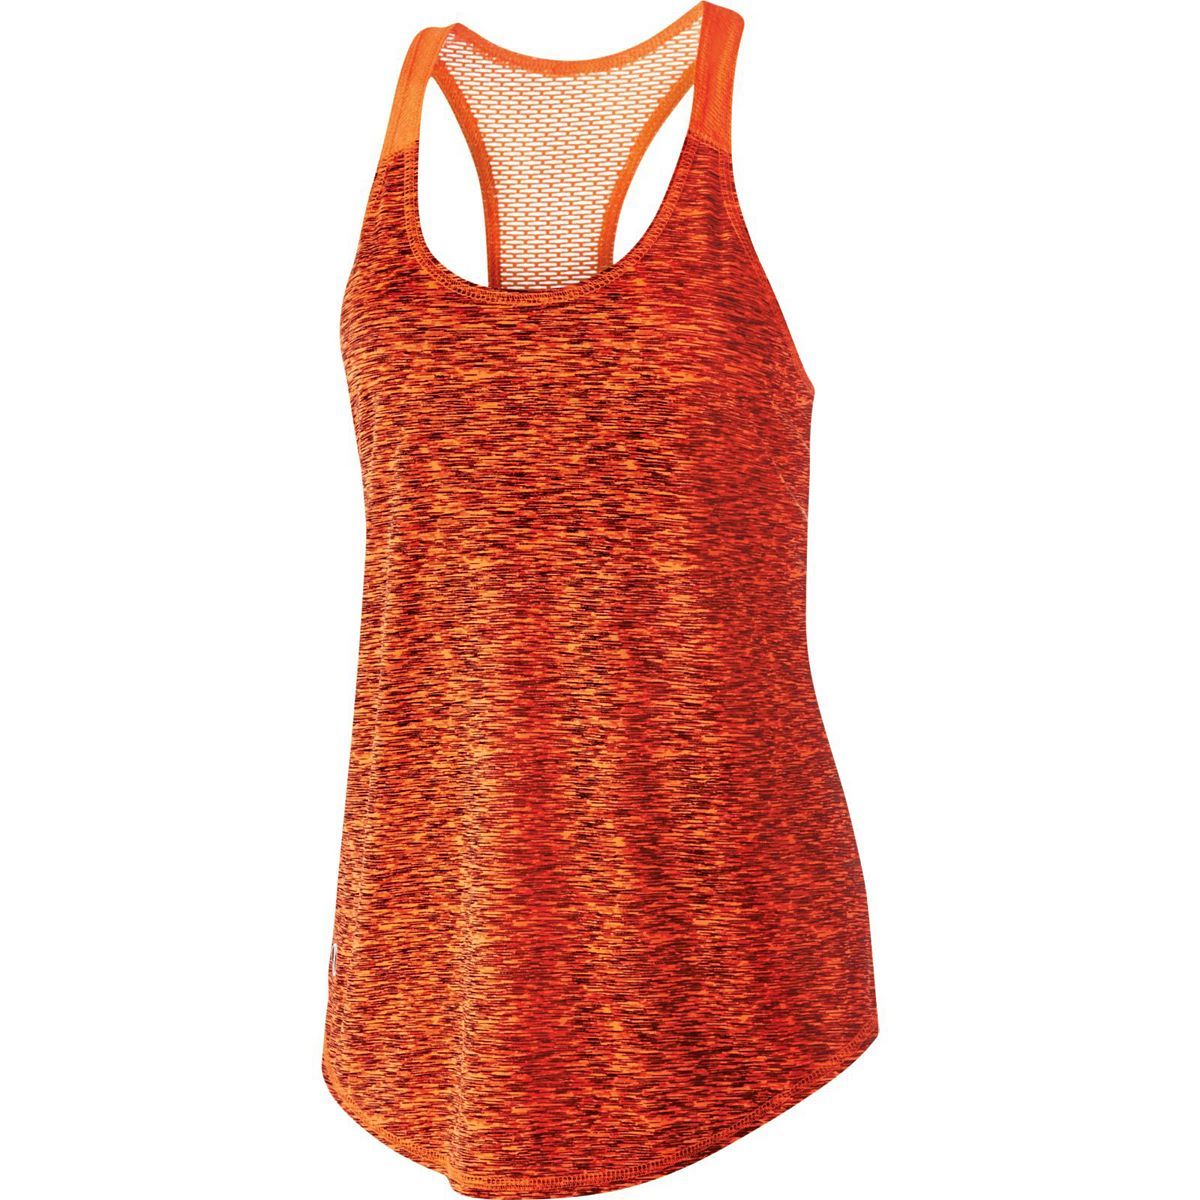 Holloway Girls Space Dye Tank in Orange/Bright Orange  -Part of the Girls, Holloway, Girls-Tank, Shirts product lines at KanaleyCreations.com